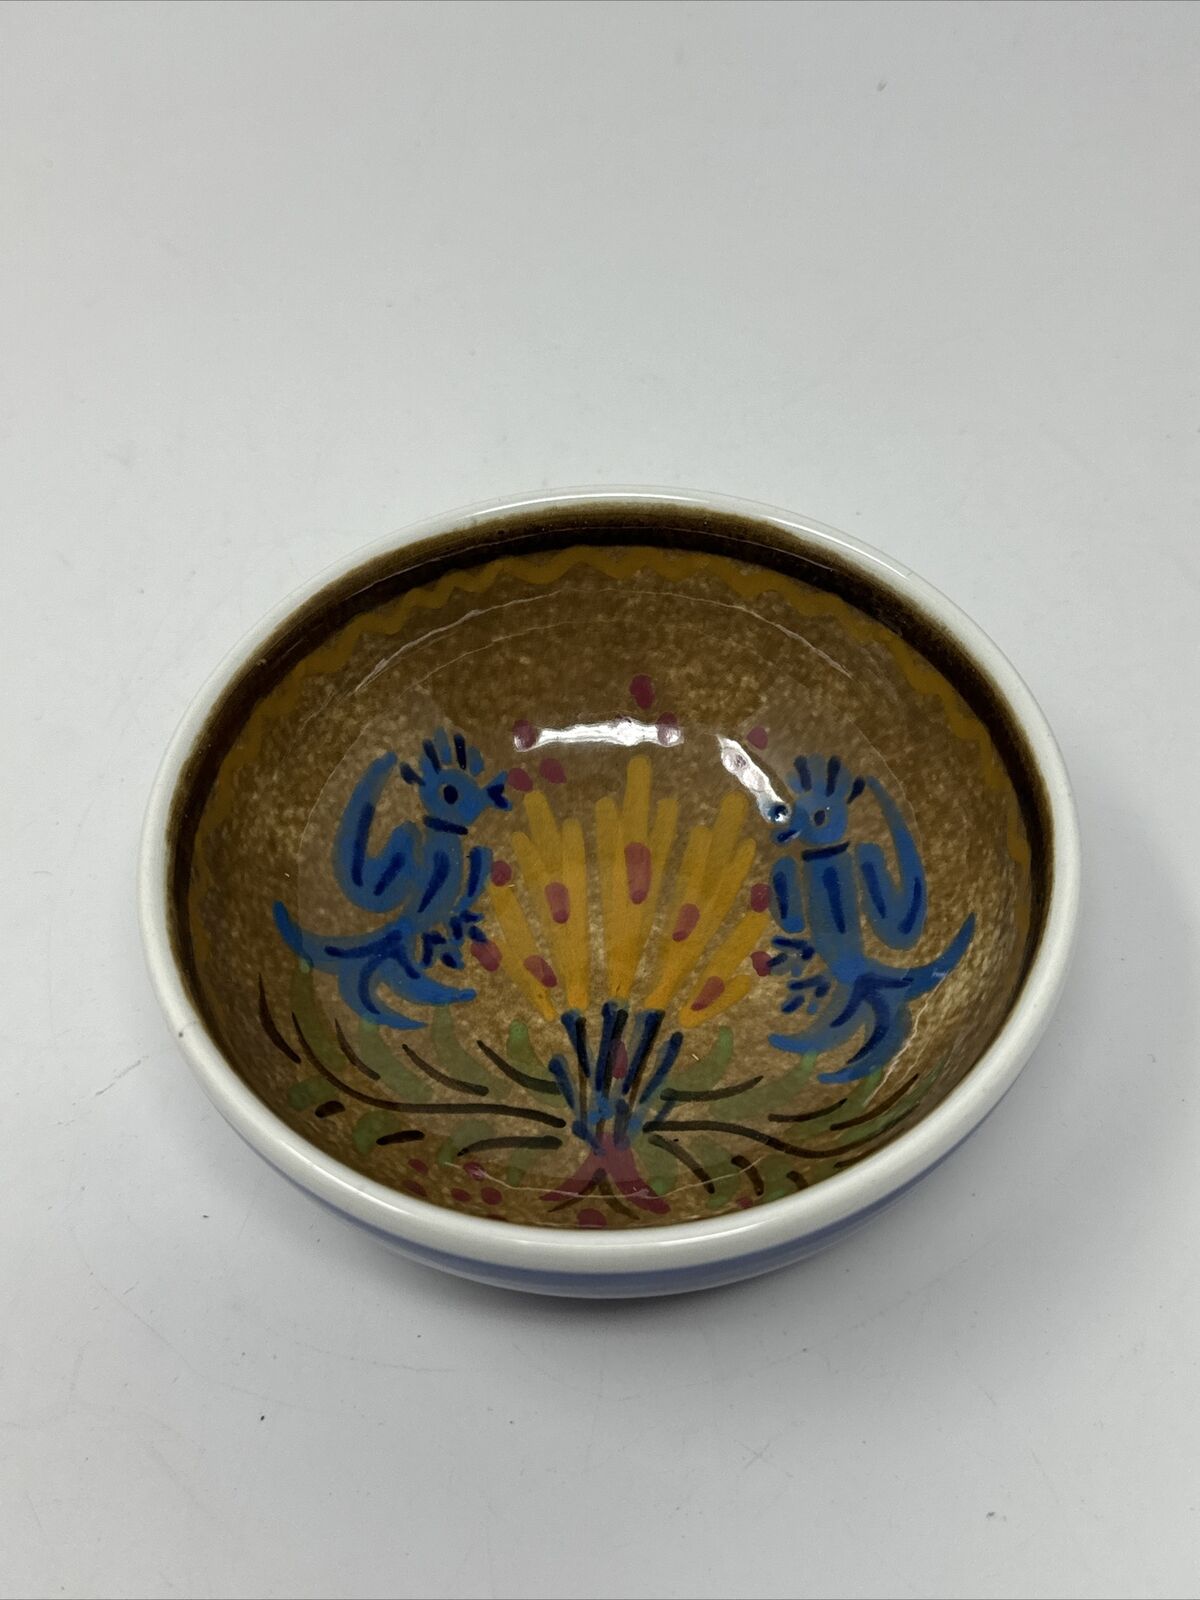 Keramikos Hand-painted Bowl Birds Floral Handmade In Athens Greece 5”x2”